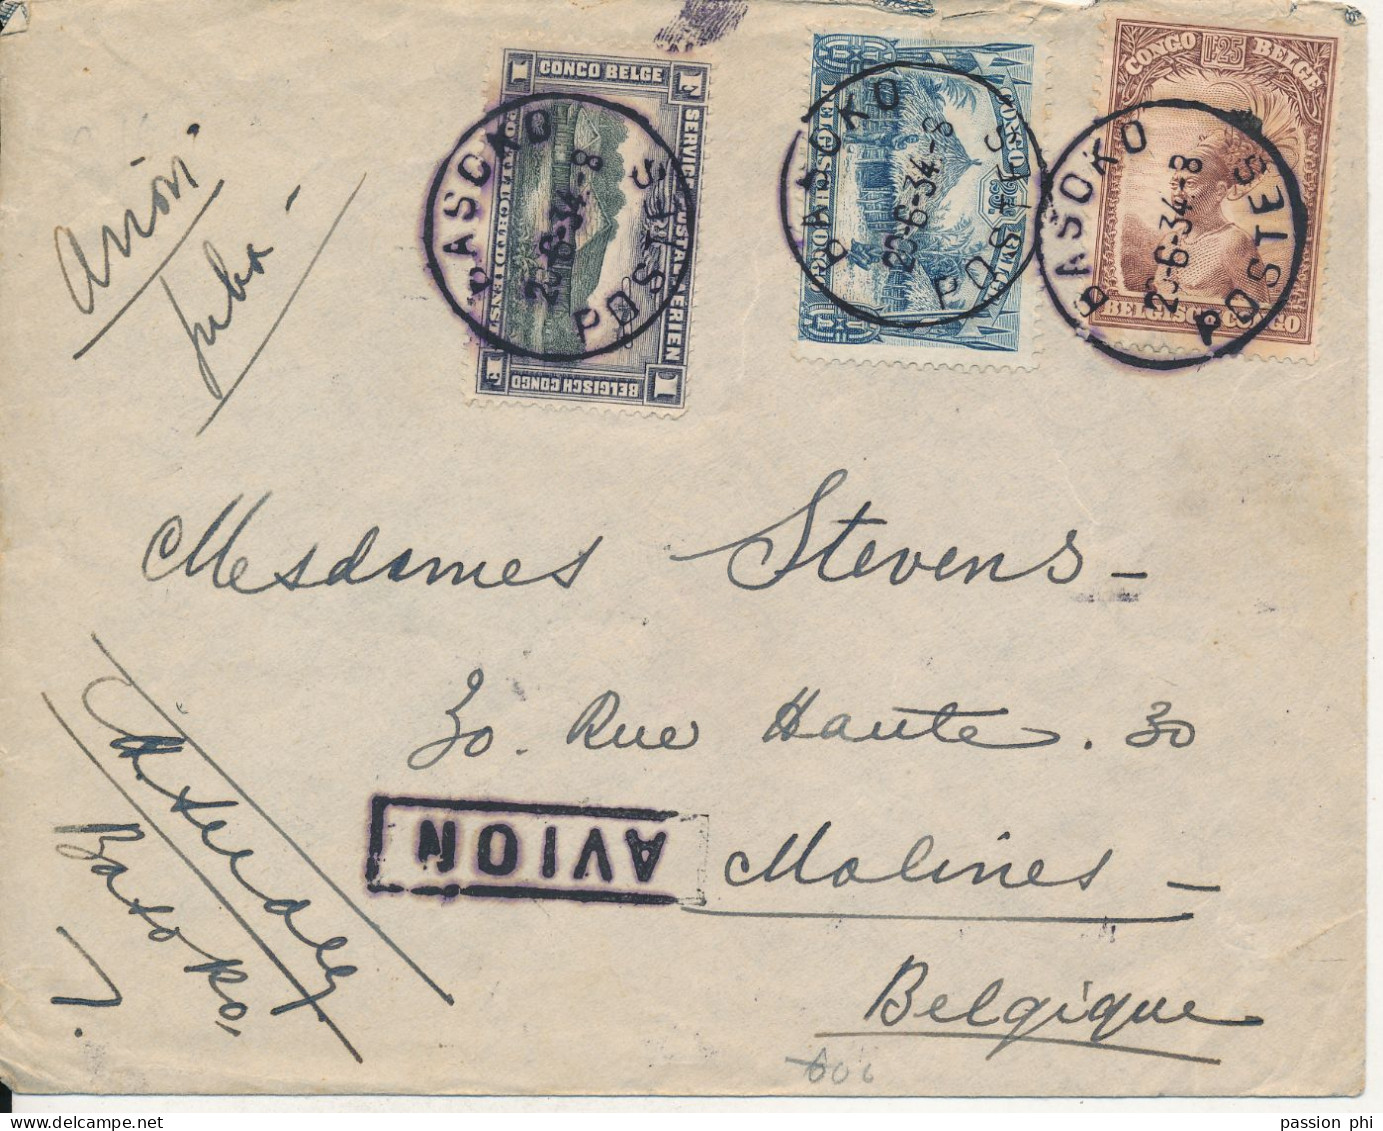 BELGIAN CONGO AIR COVER FROM BASOKO 20.06.34 TO MECHELEN - Covers & Documents